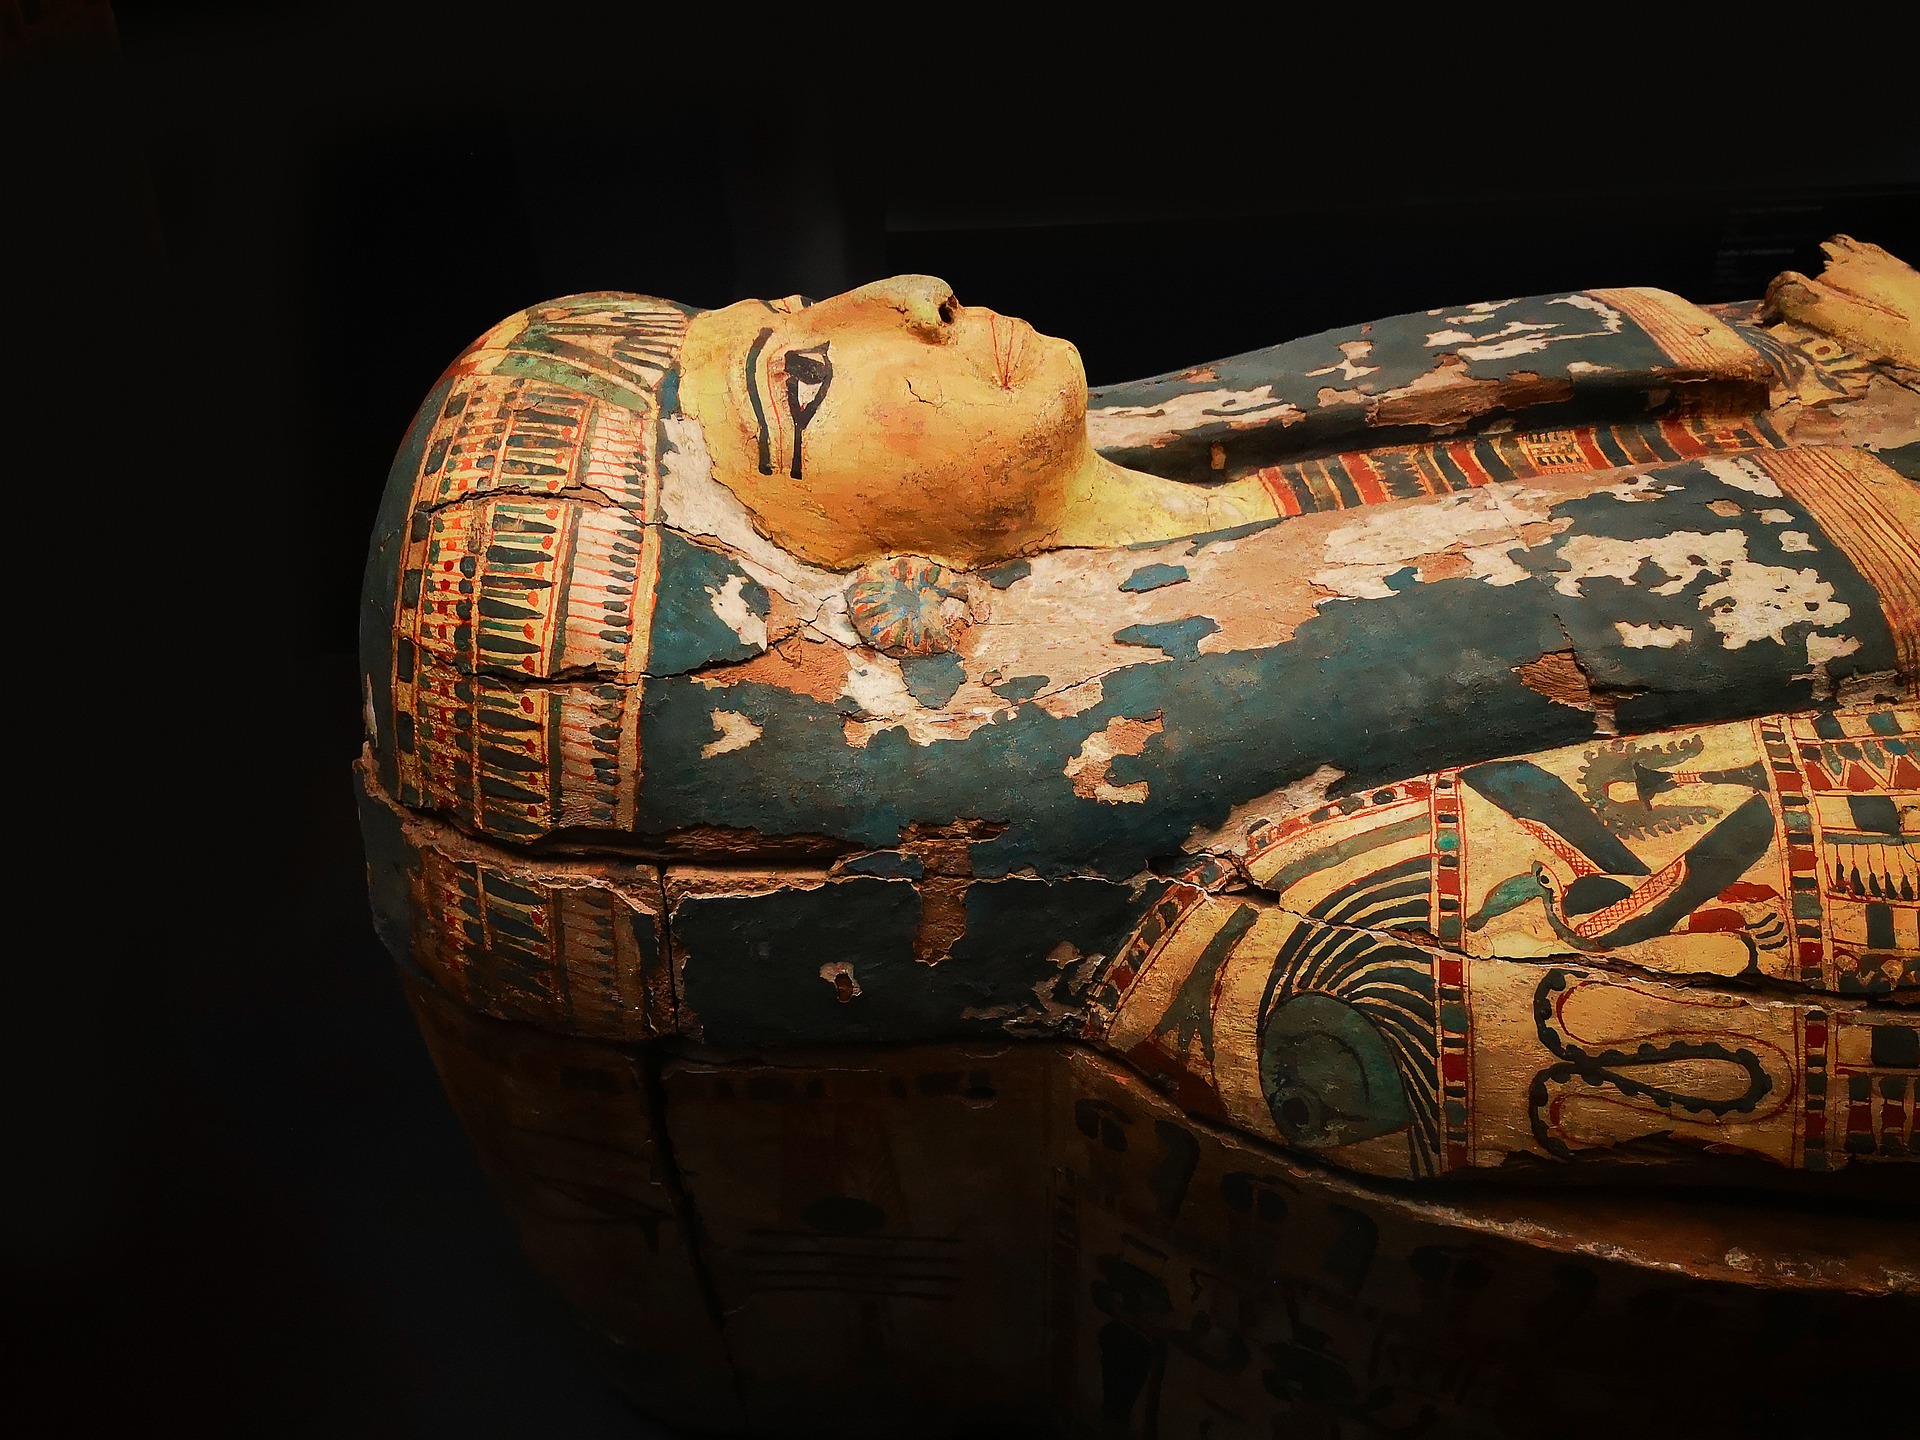 The Egyptian Museum of Civilization is preparing to receive royal mummies